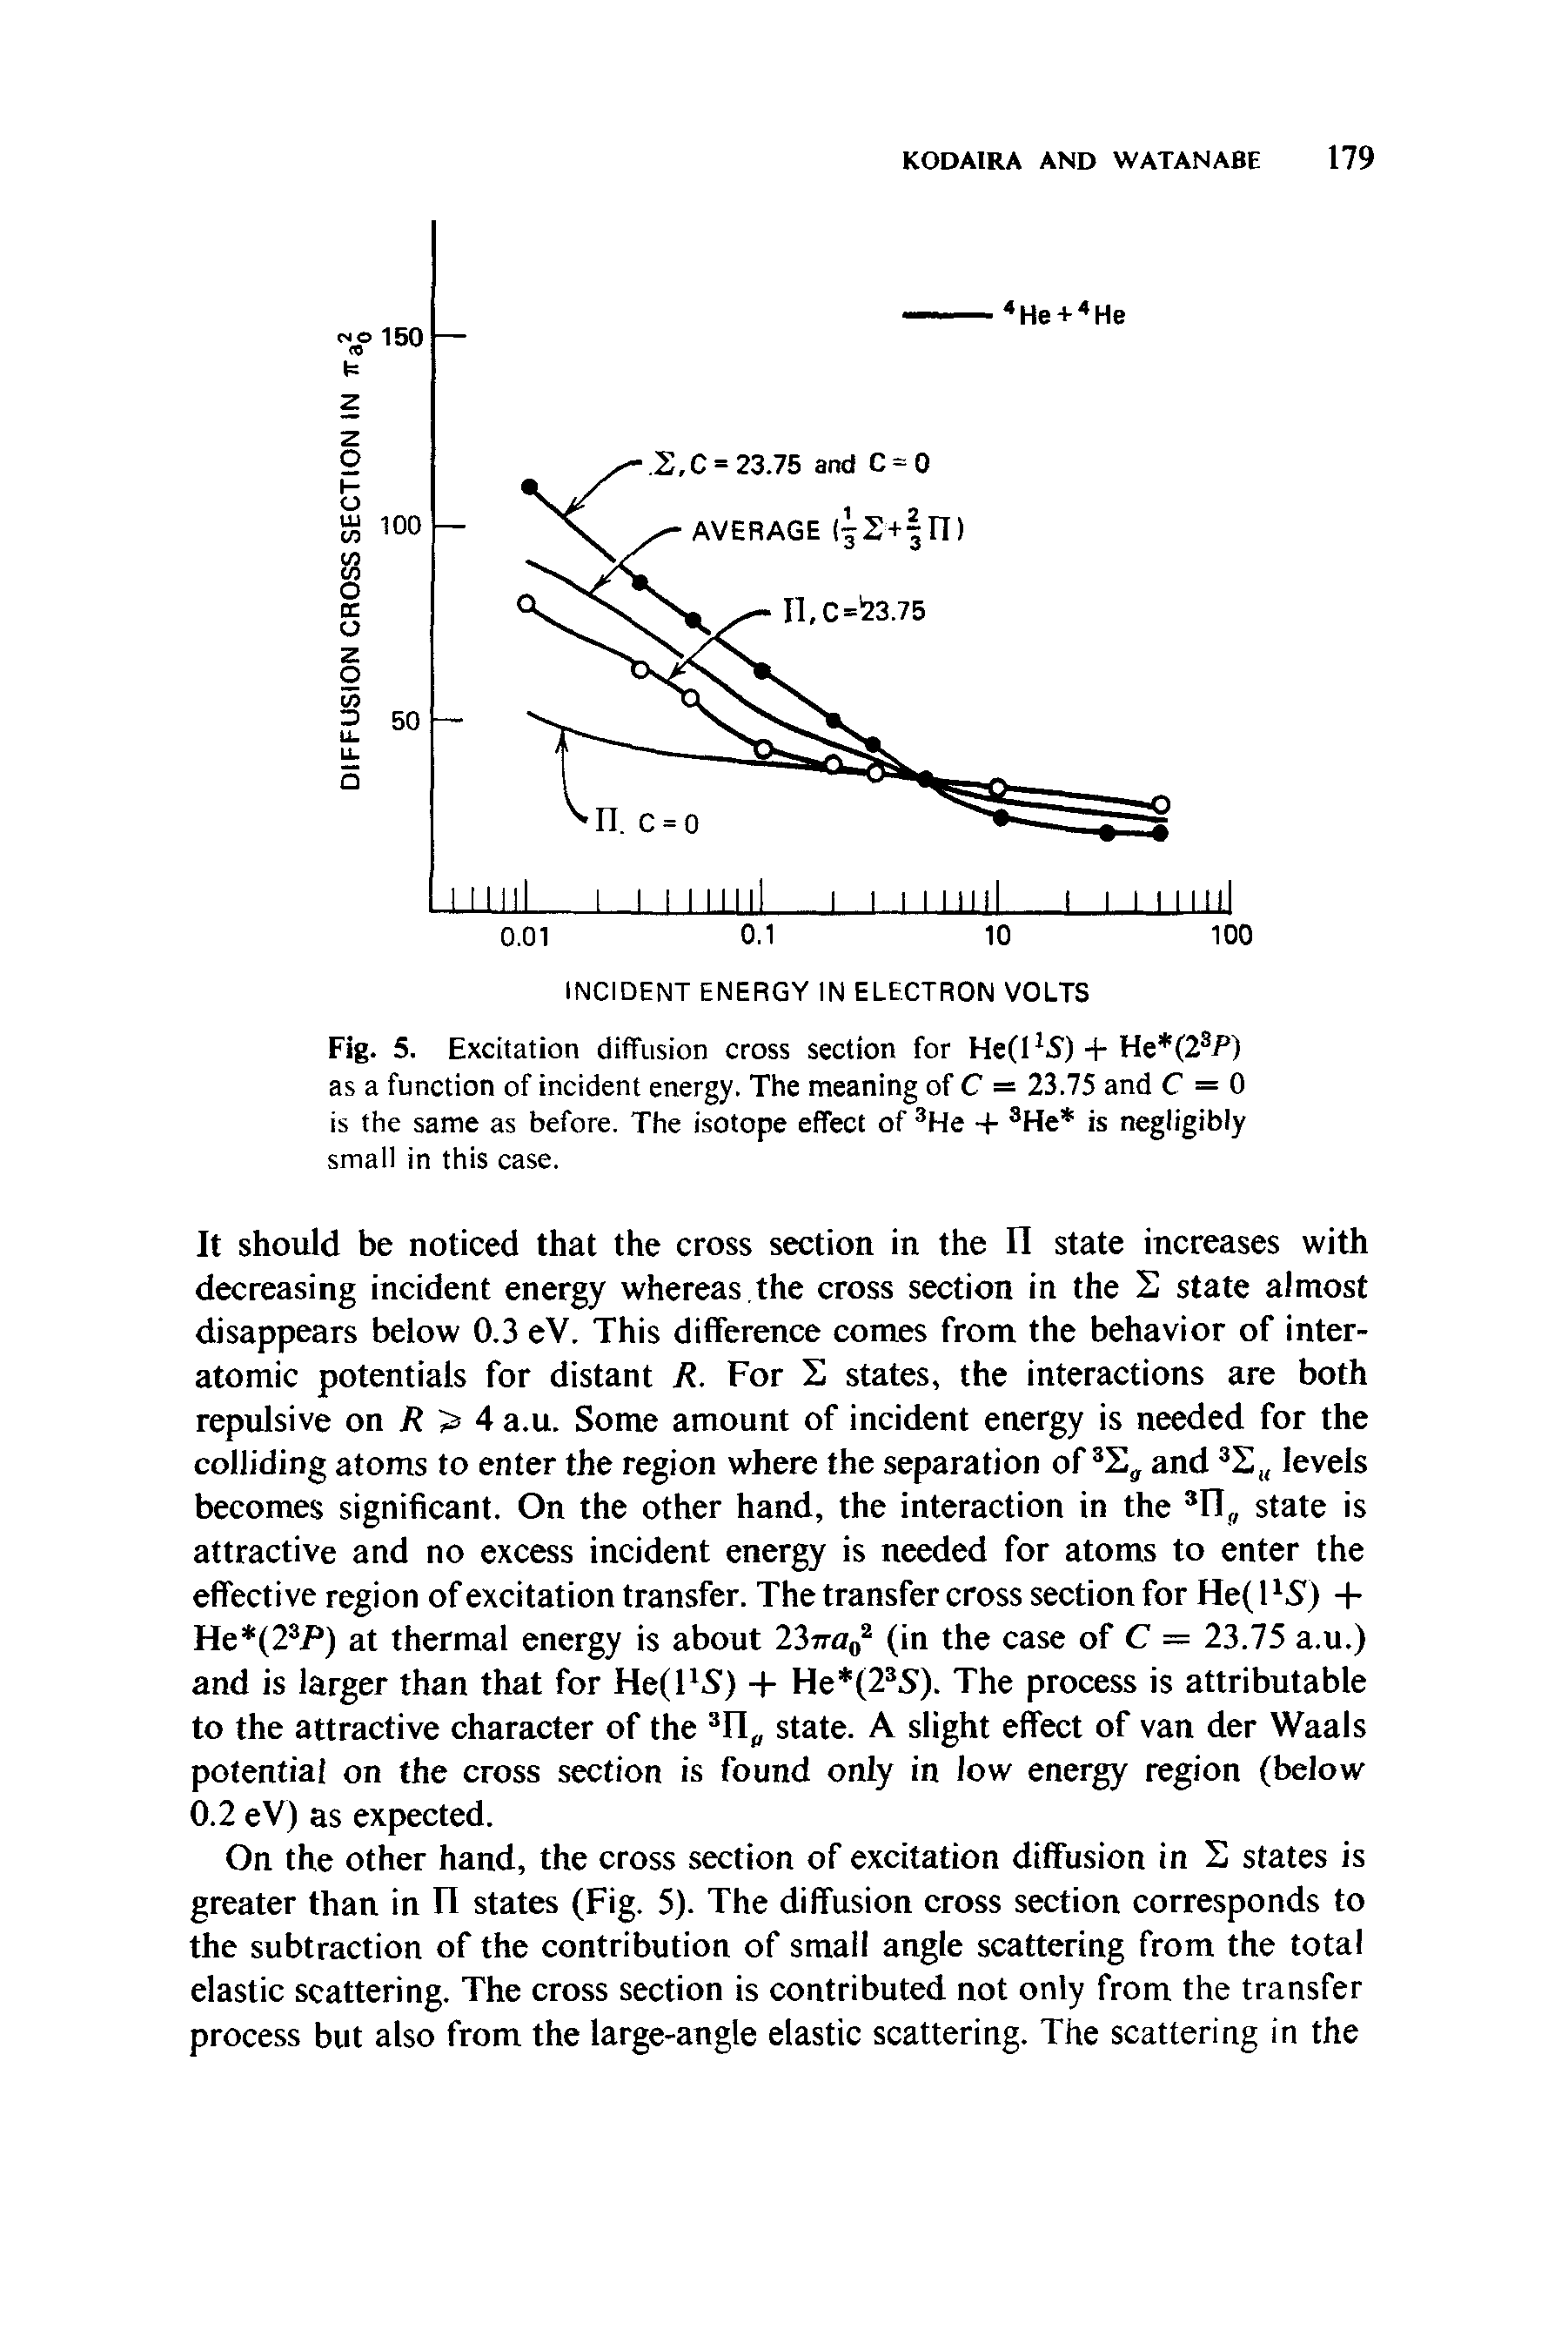 Fig. 5. Excitation diffusion cross section for He(P5) + He (2 / ) as a function of incident energy. The meaning of C = 23.75 and C = 0 is the same as before. The isotope effect of He + He is negligibly small in this case.